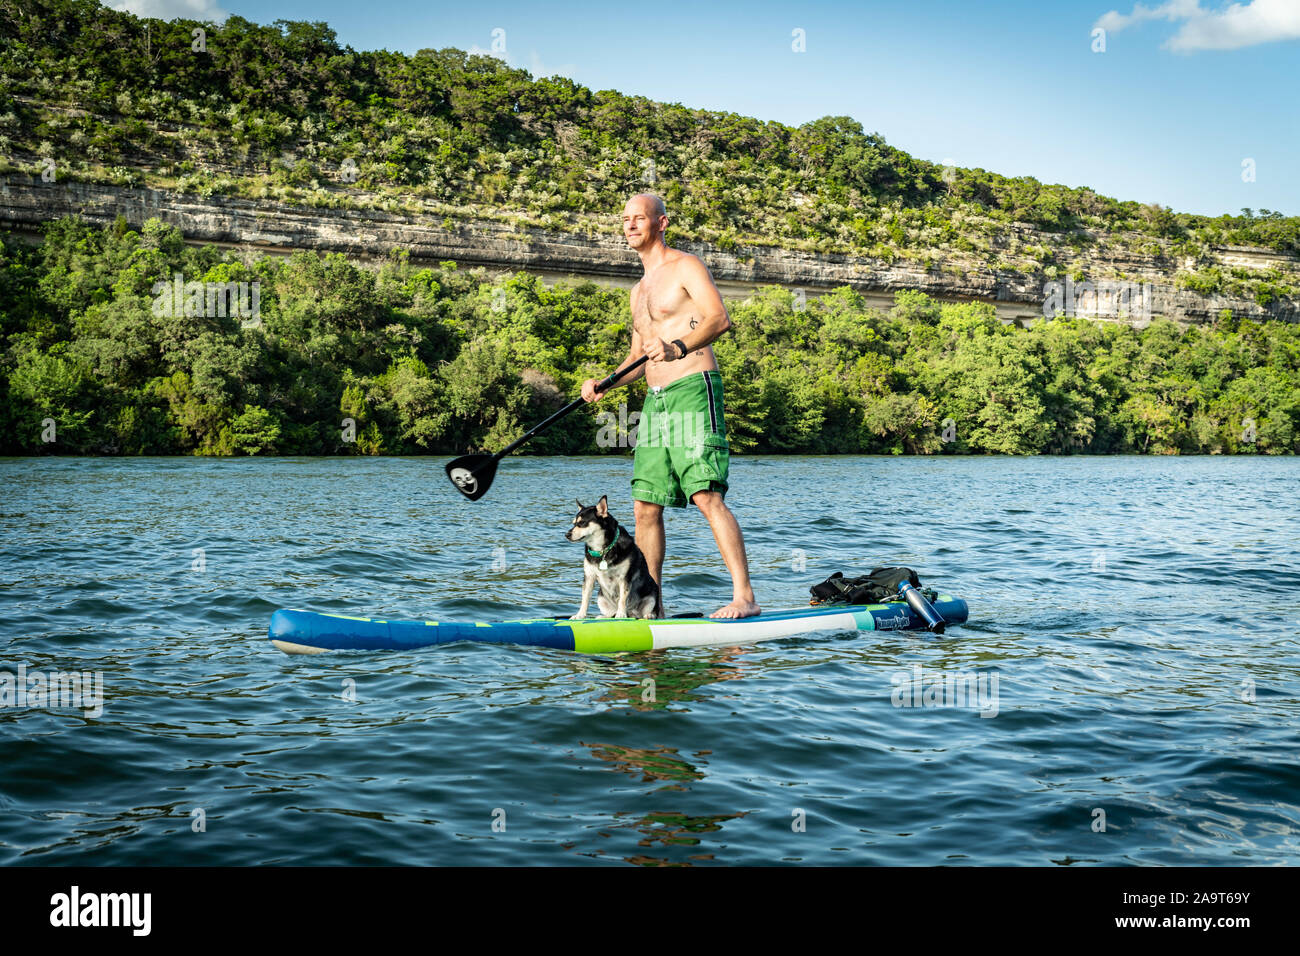 Austin, Texas, USA. 28 June, 2019. Stand Up Paddleboarding on Lake Austin. A man takes a stand up paddleboard on Lake Austin and travels from Pennybac Stock Photo